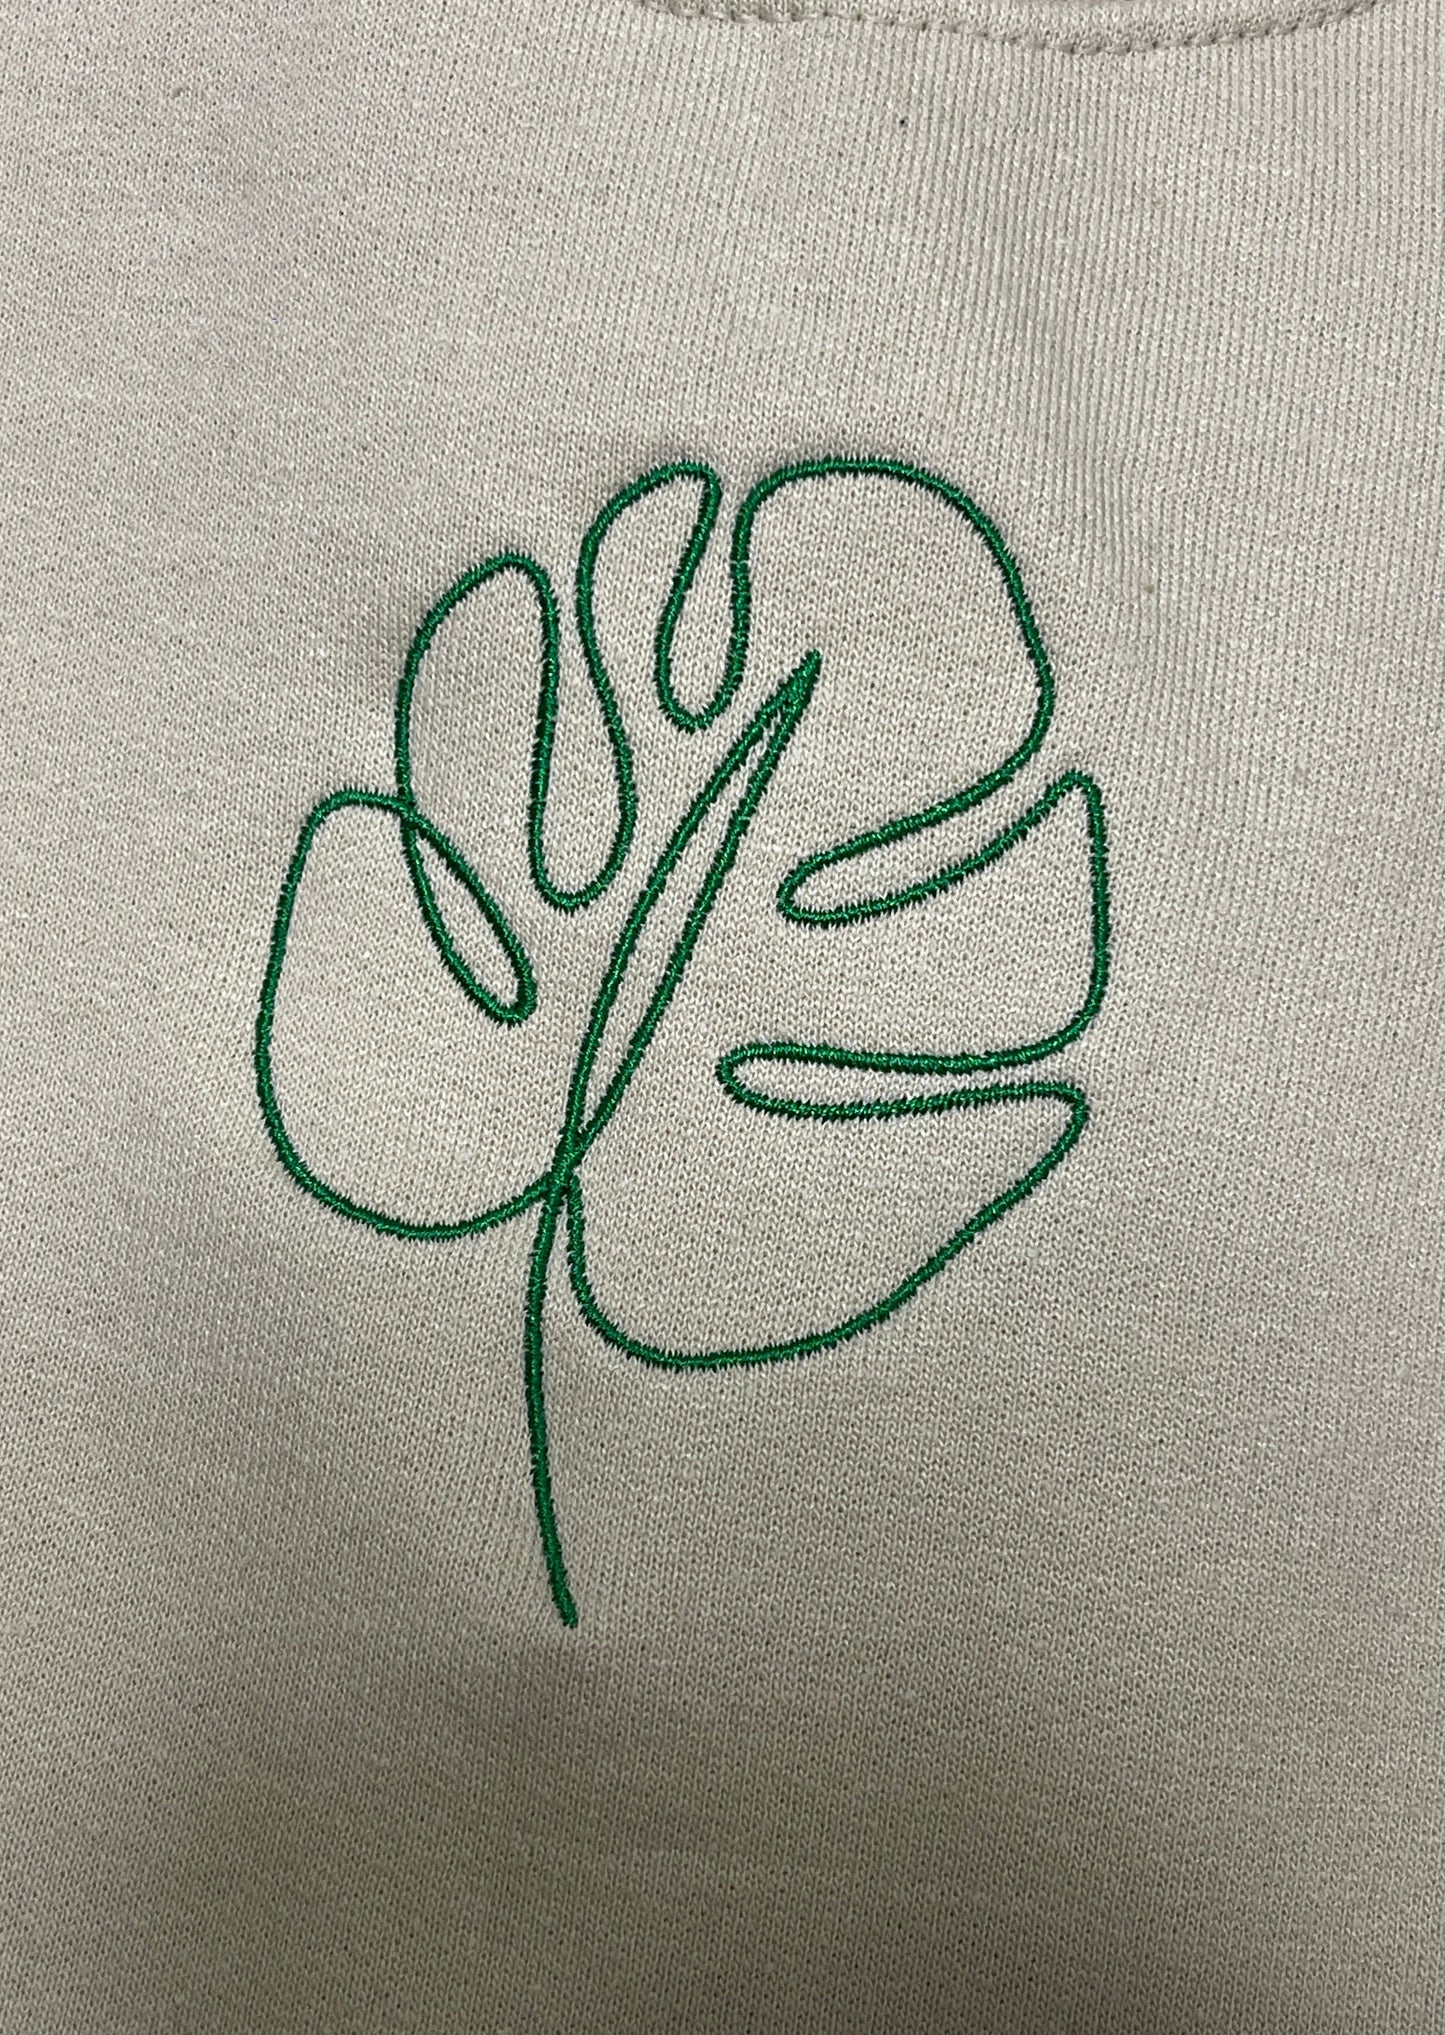 Monstera Leaf Plant Embroidery